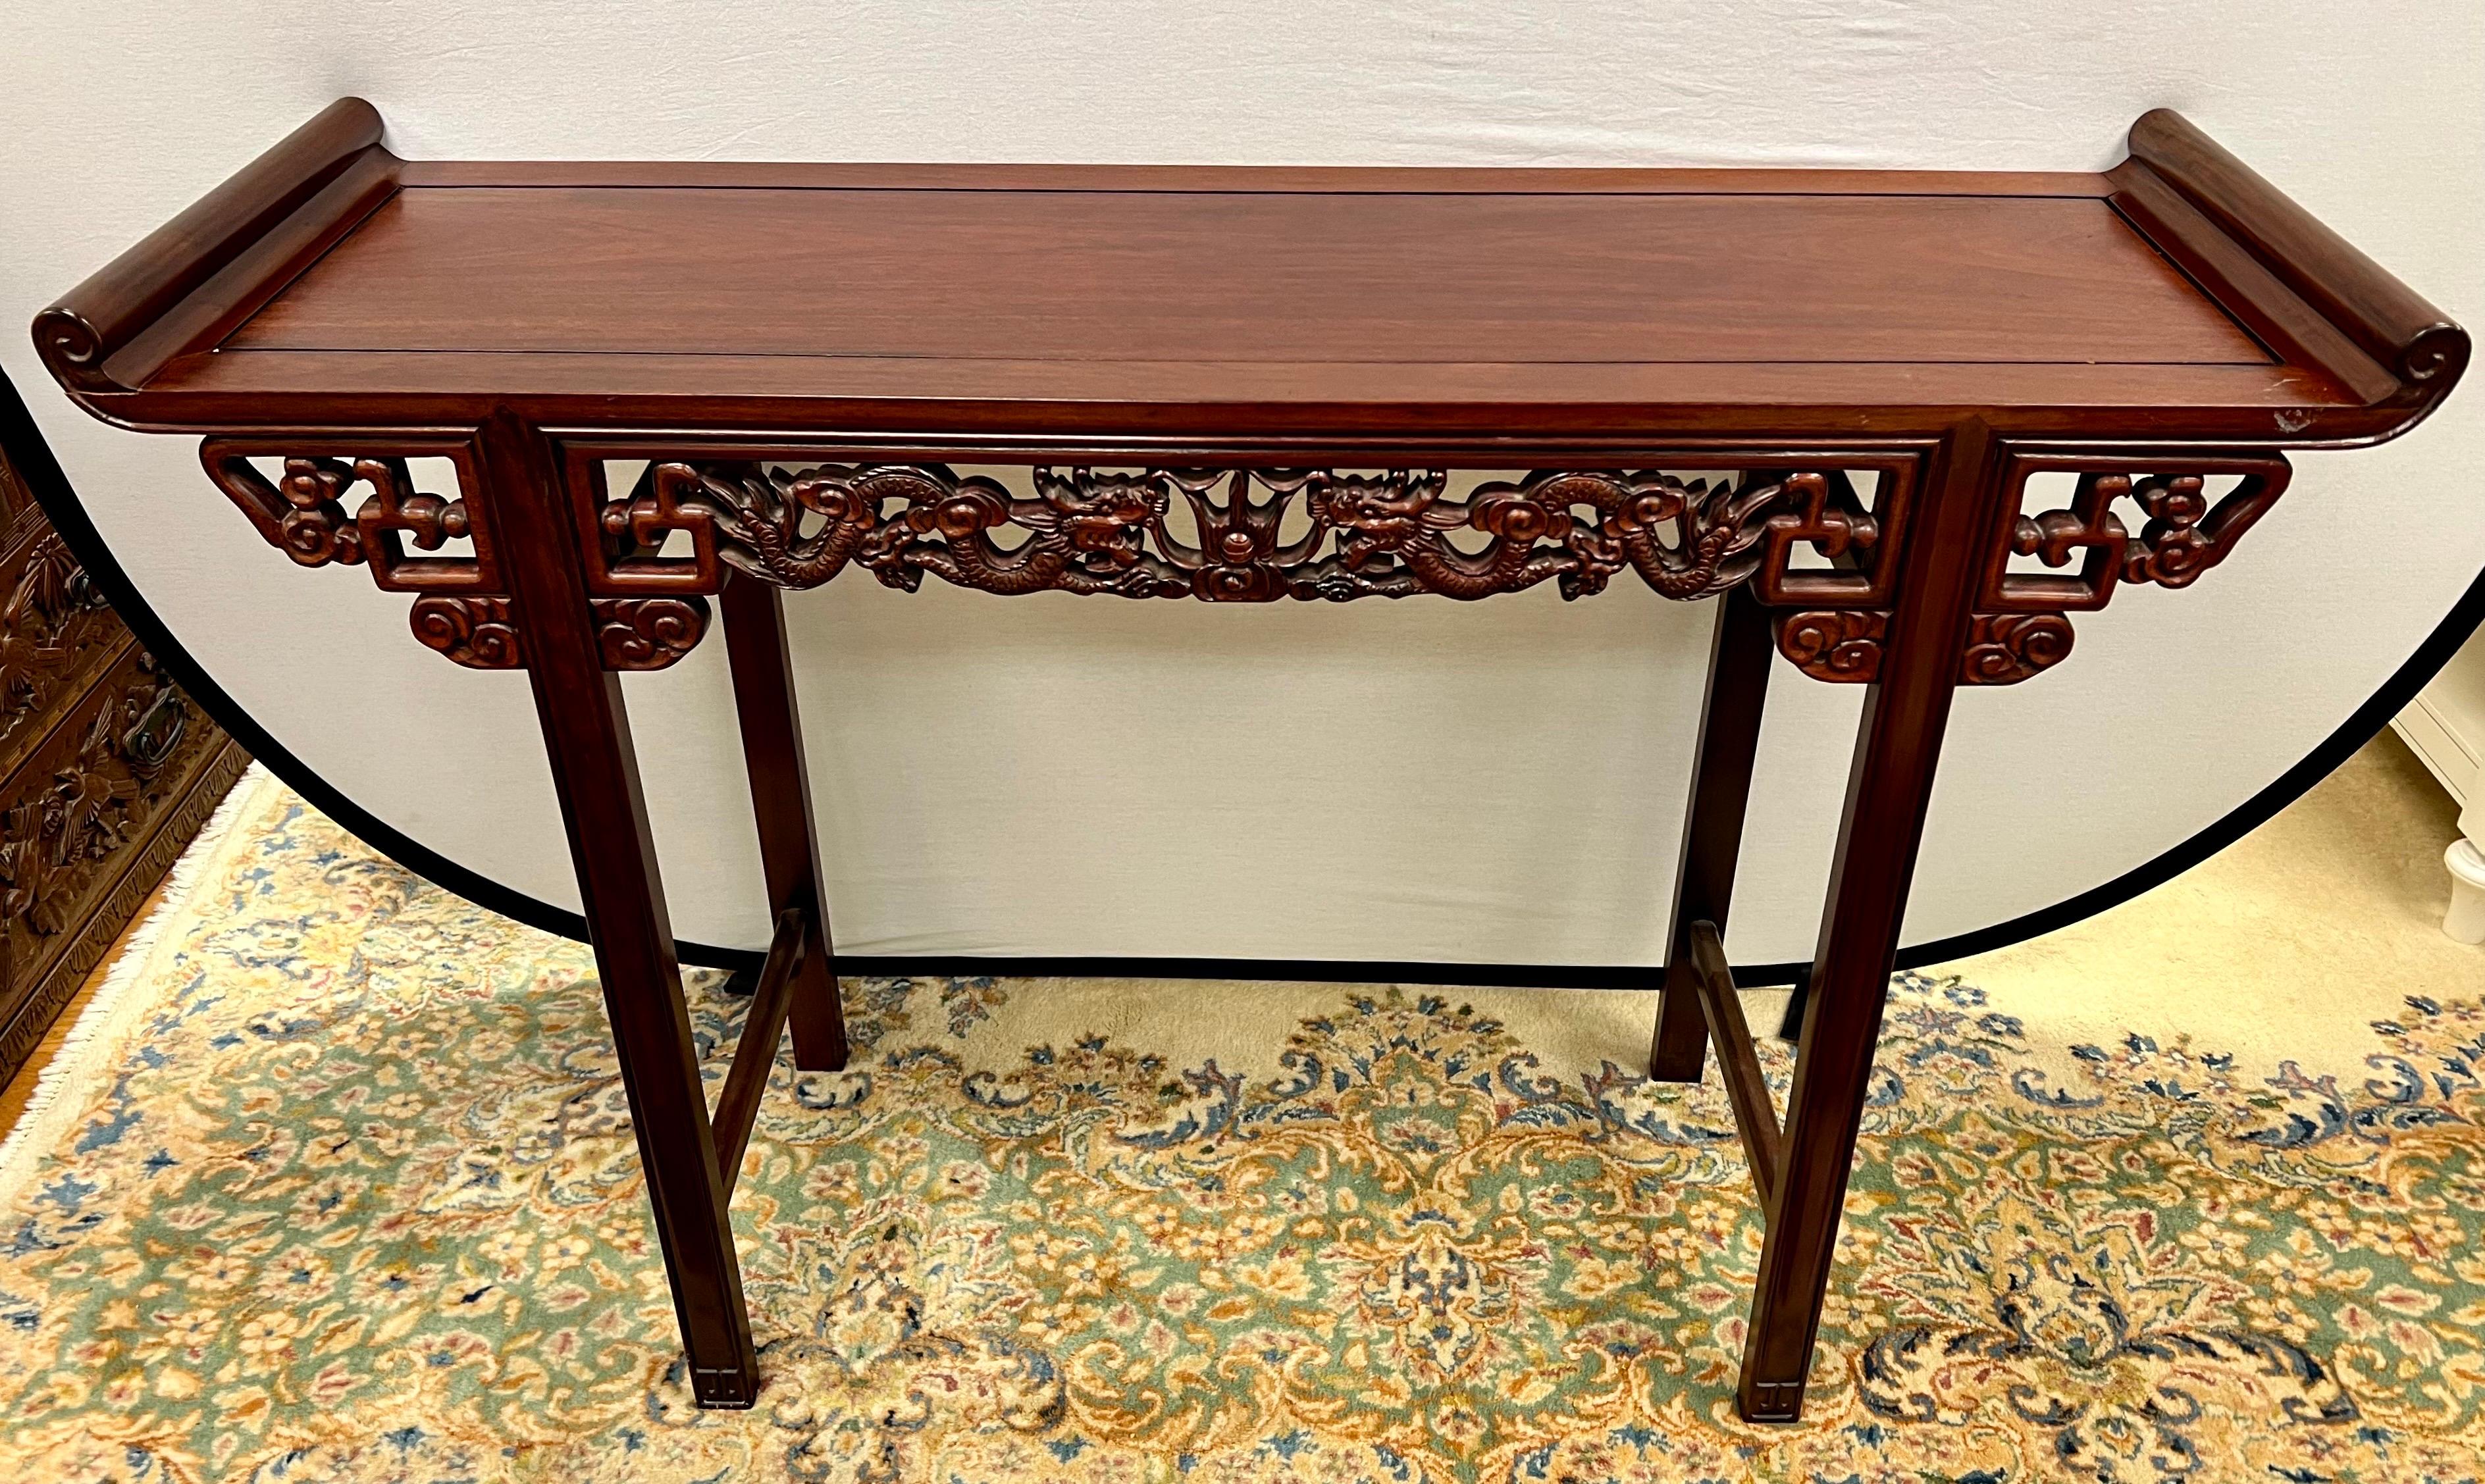 Chinese altar table with beautiful hand carved open fretwork with dragons on the front and back. Use it as an entry console or sofa table as well as a buffet table.